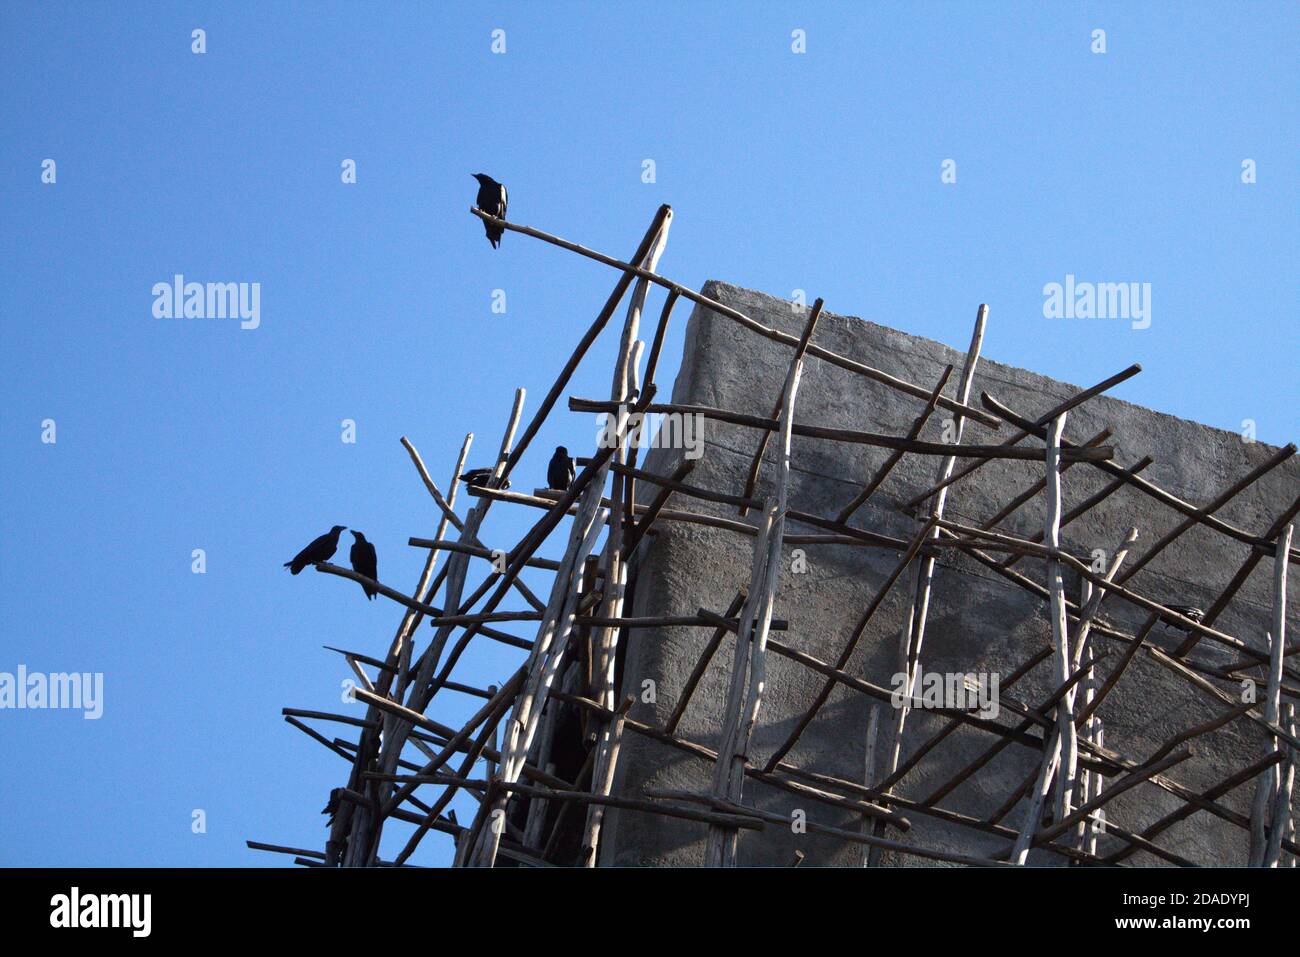 Black crows on wood scaffolding against blue sky Stock Photo